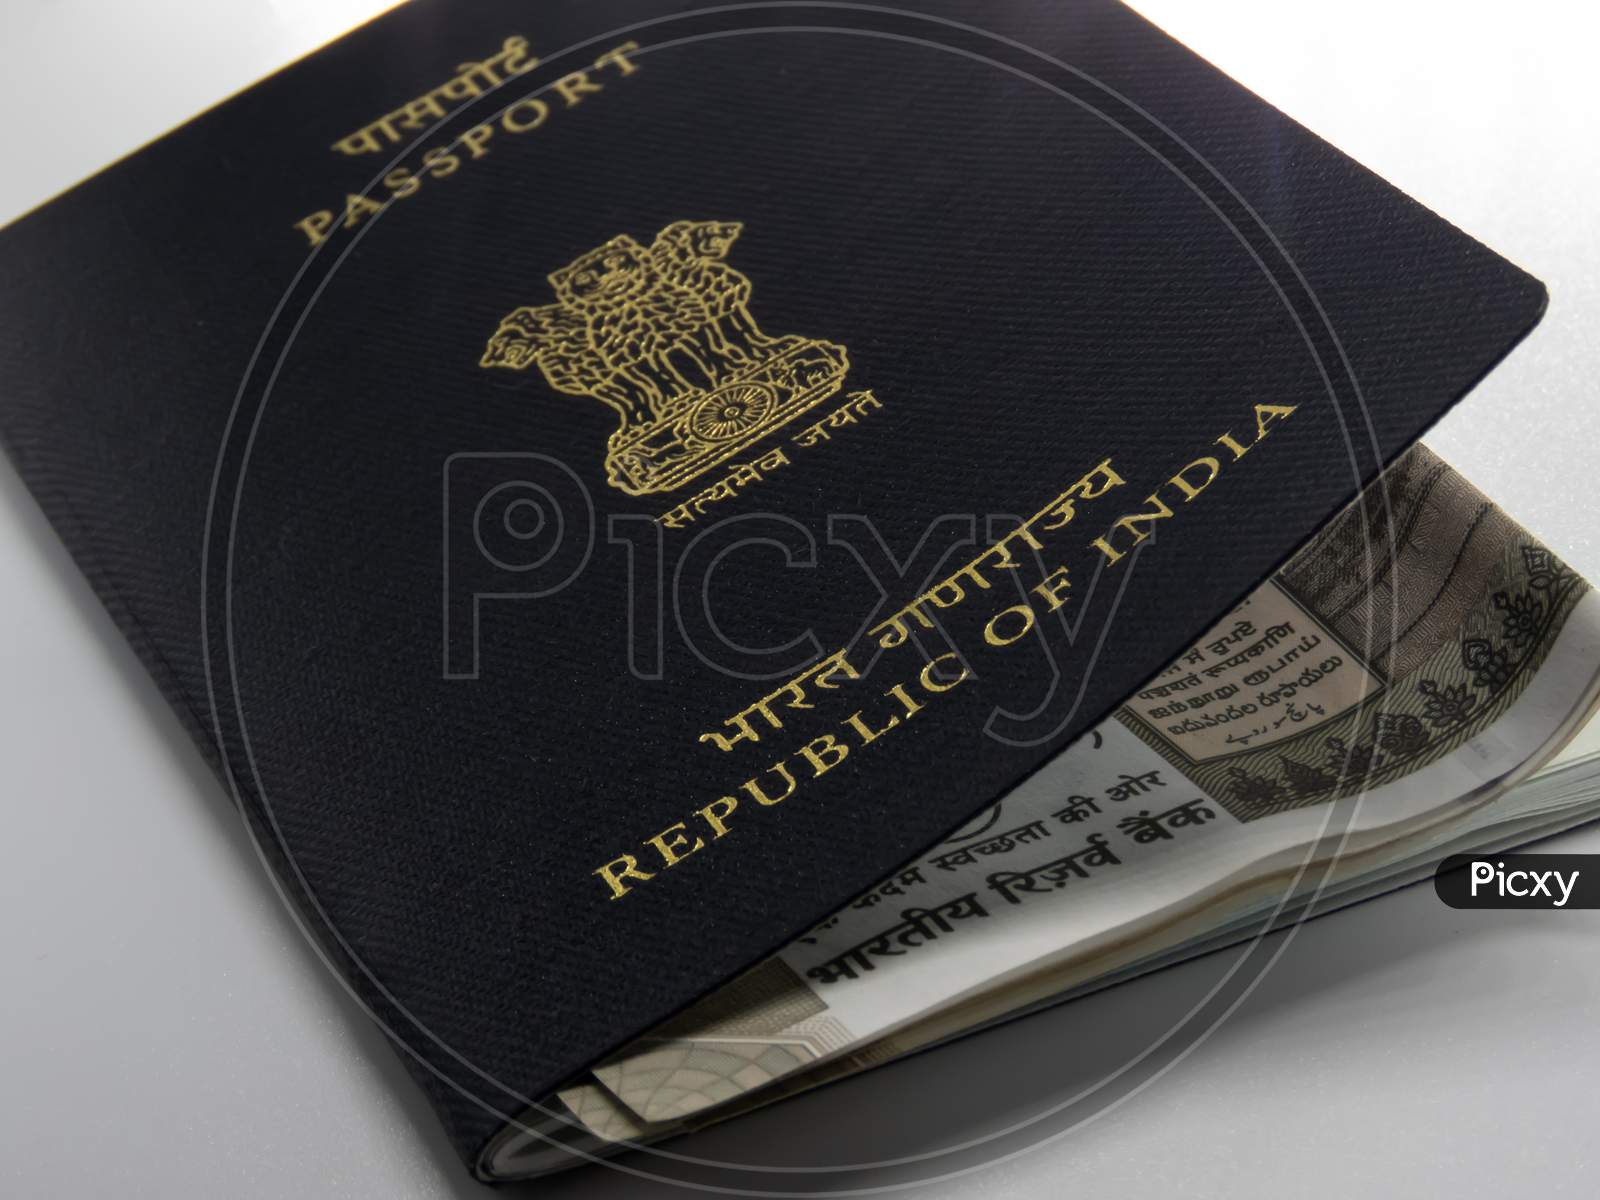 Indian Passport Kept On The Desk Along With Cash.